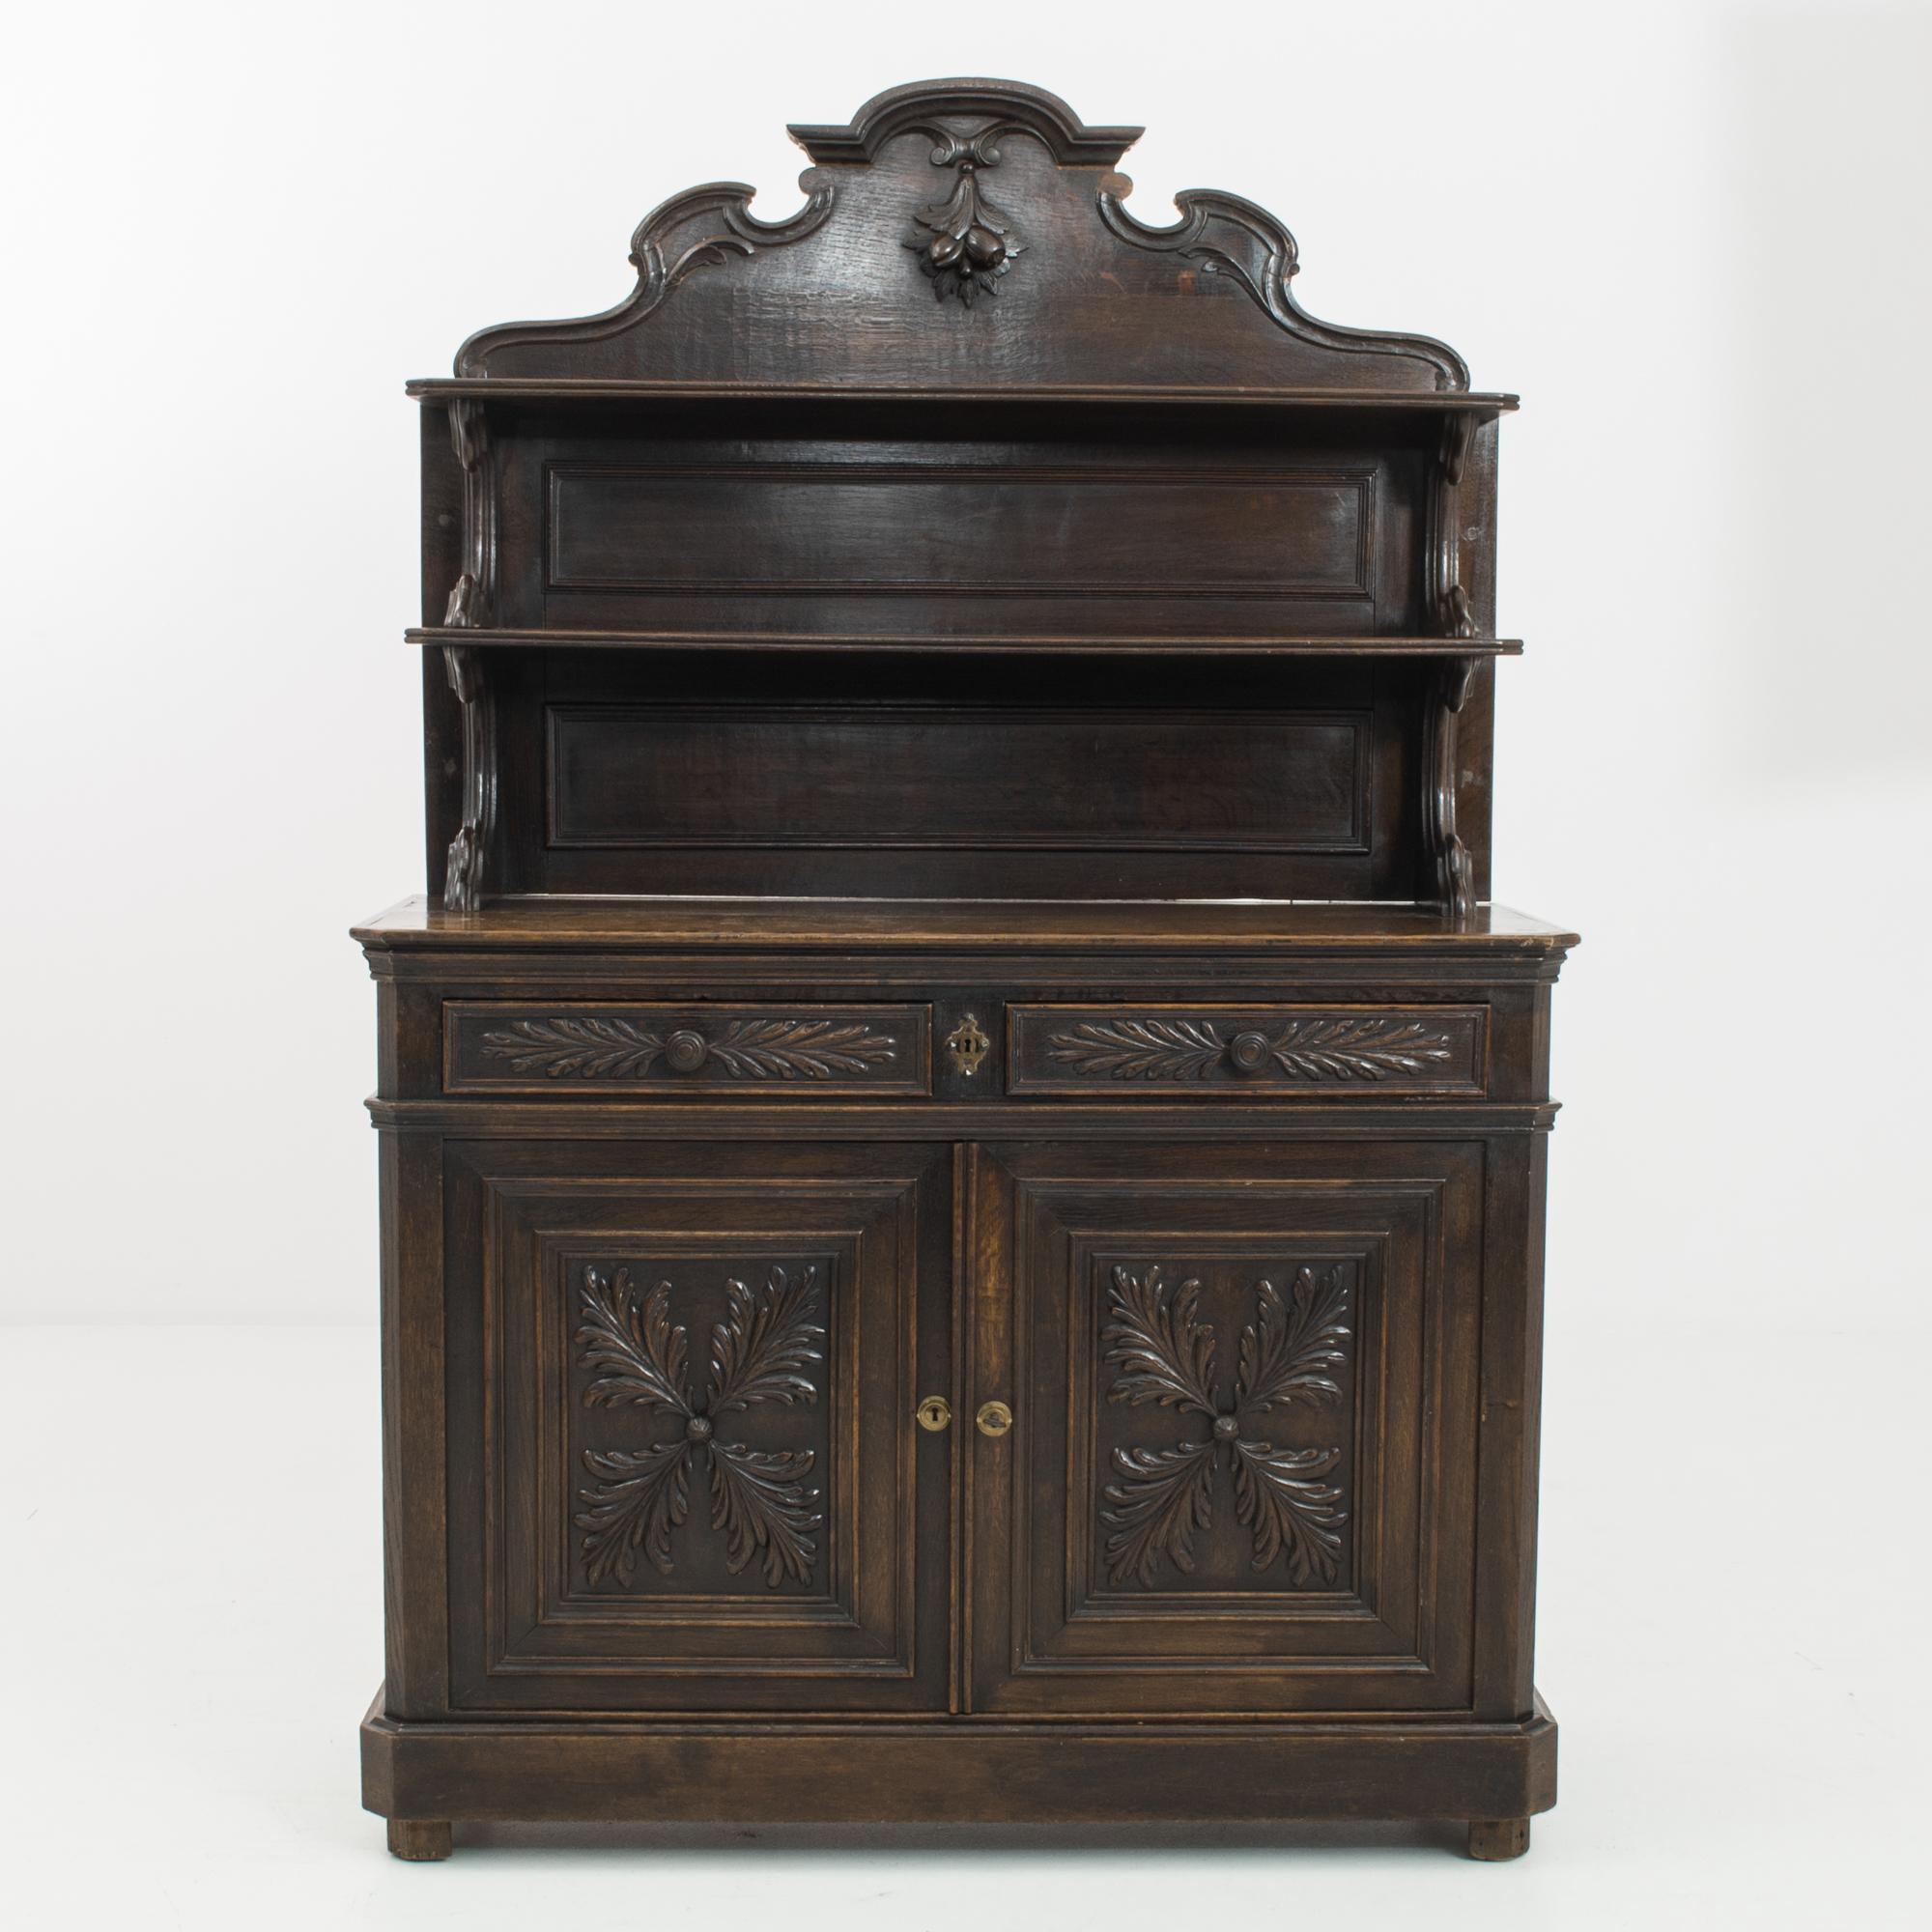 This oak cabinet was made in France, circa 1860. The remarkable workmanship behind this piece is evident in the refined floral and foliage carvings and impressive ornamented crest. Display shelves above are supported by elegantly curved brackets,